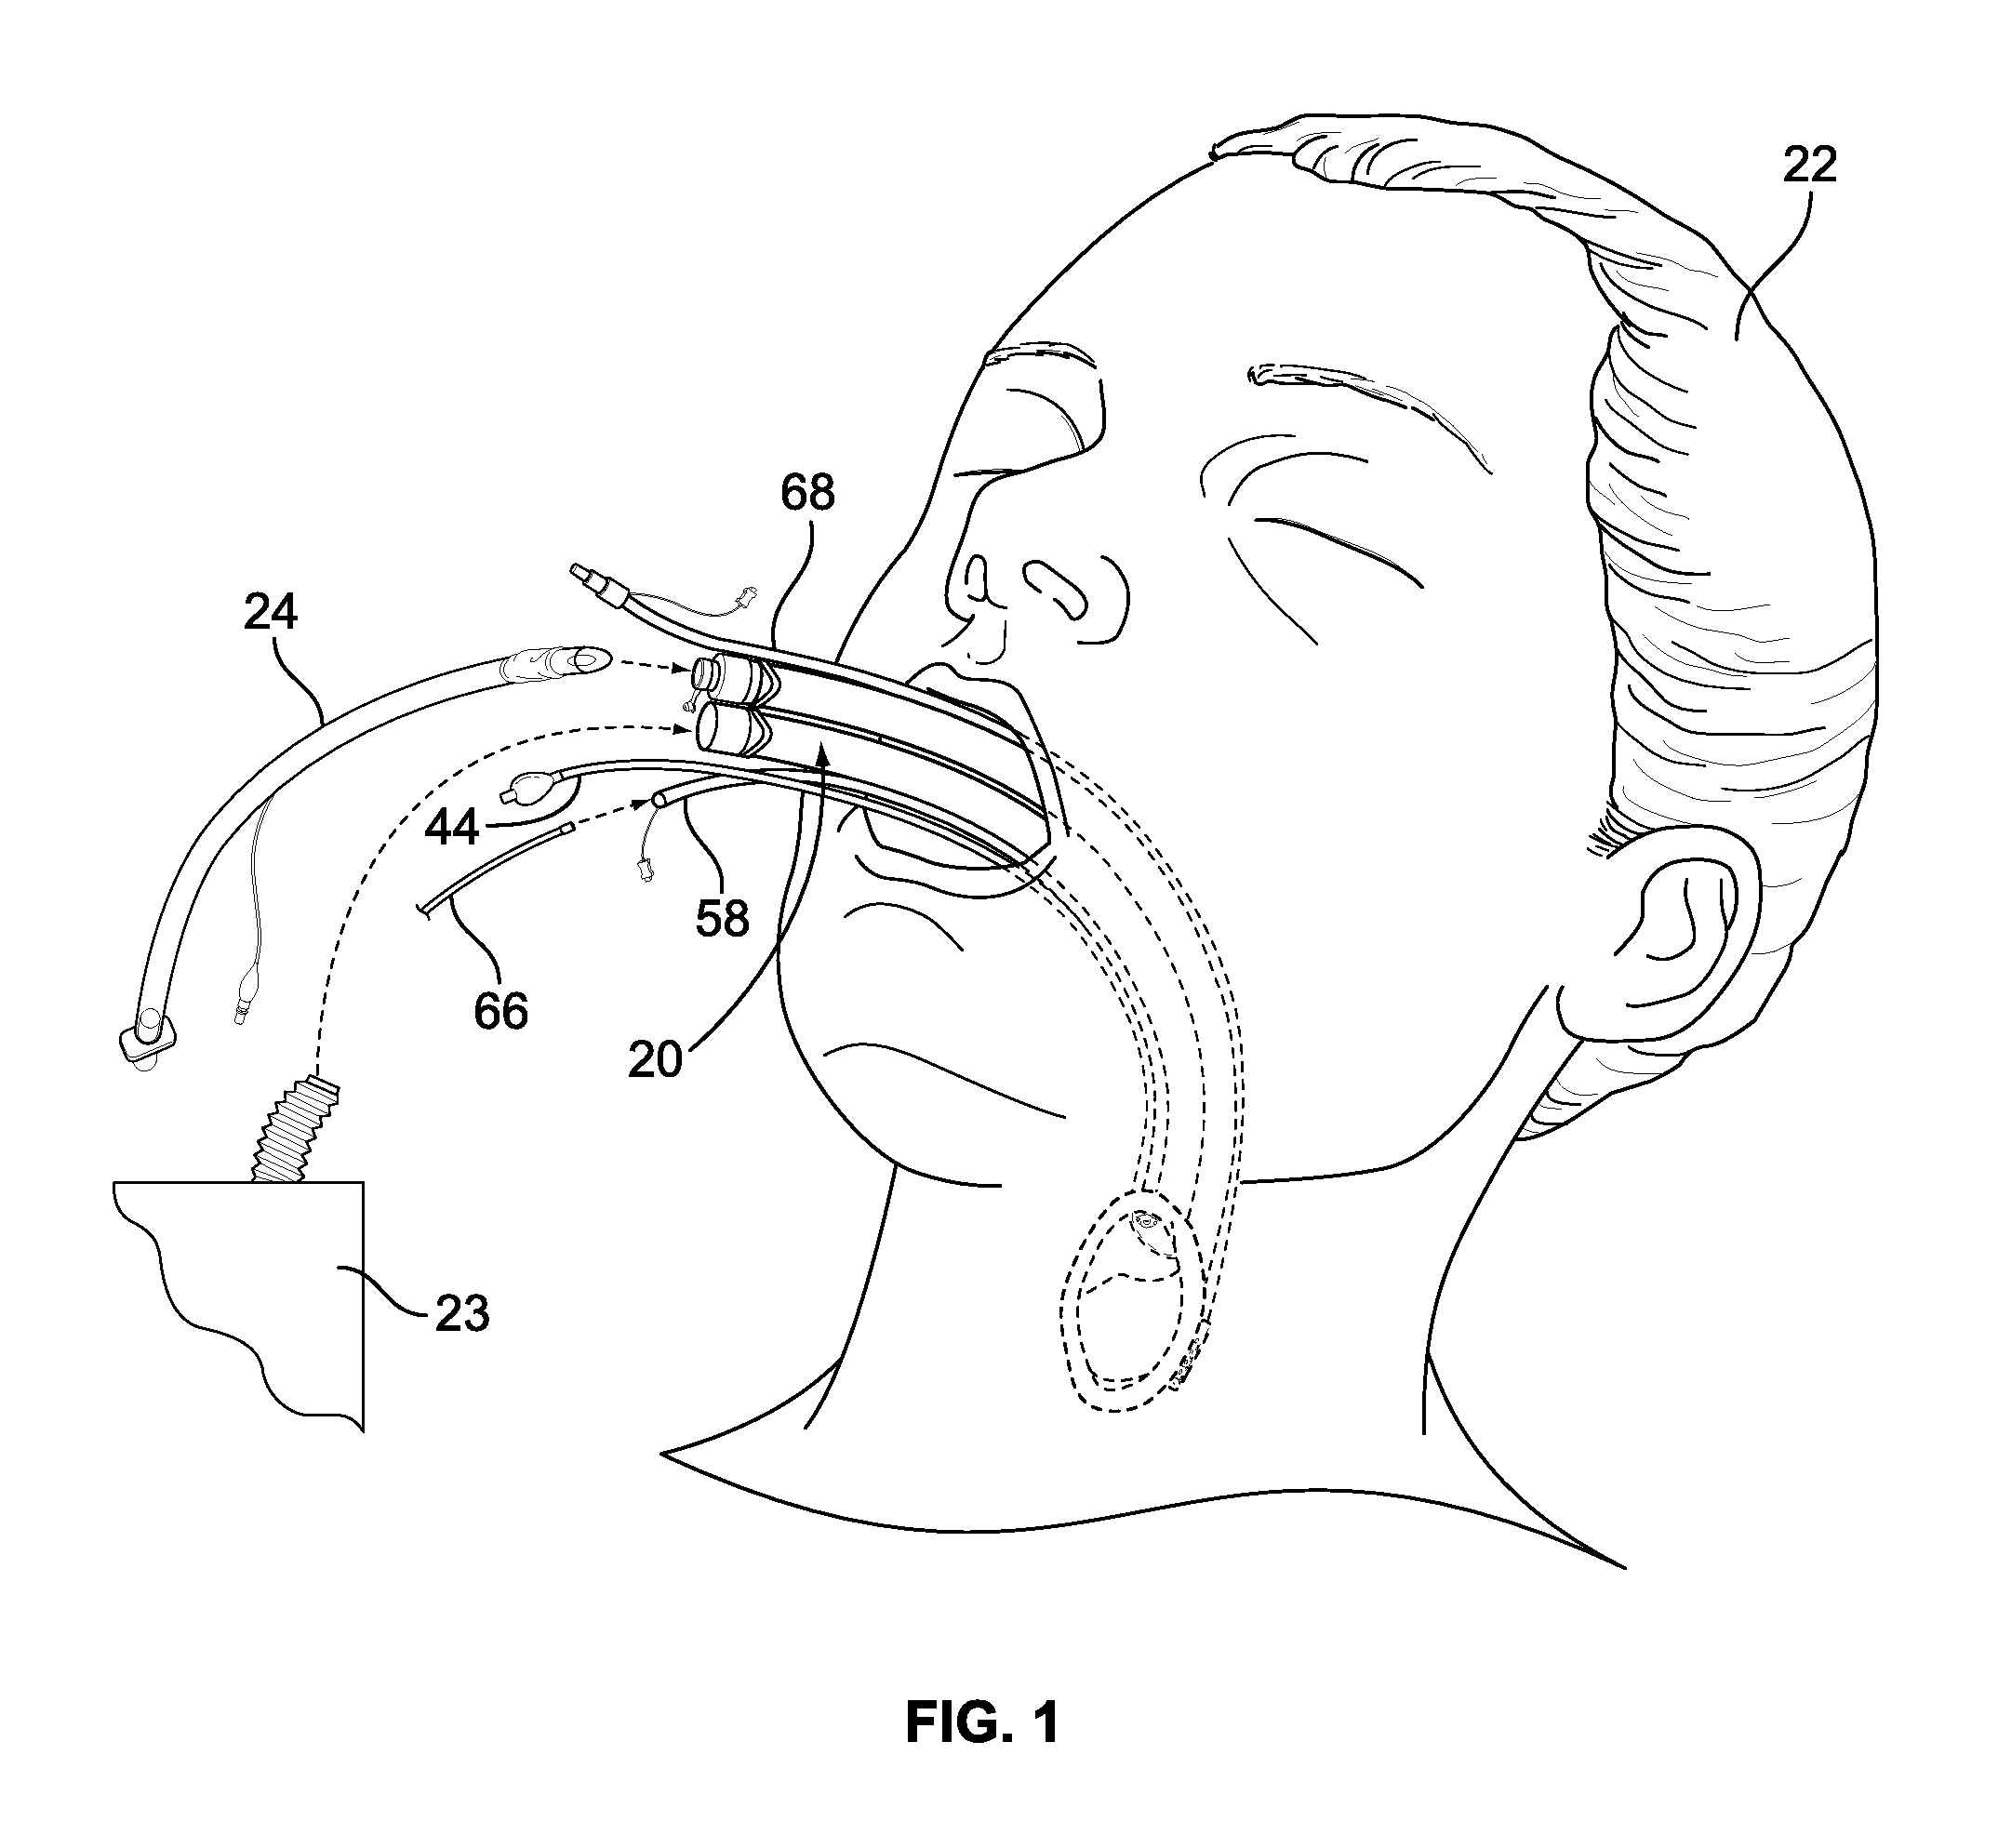 Medical device, and the methods of using same